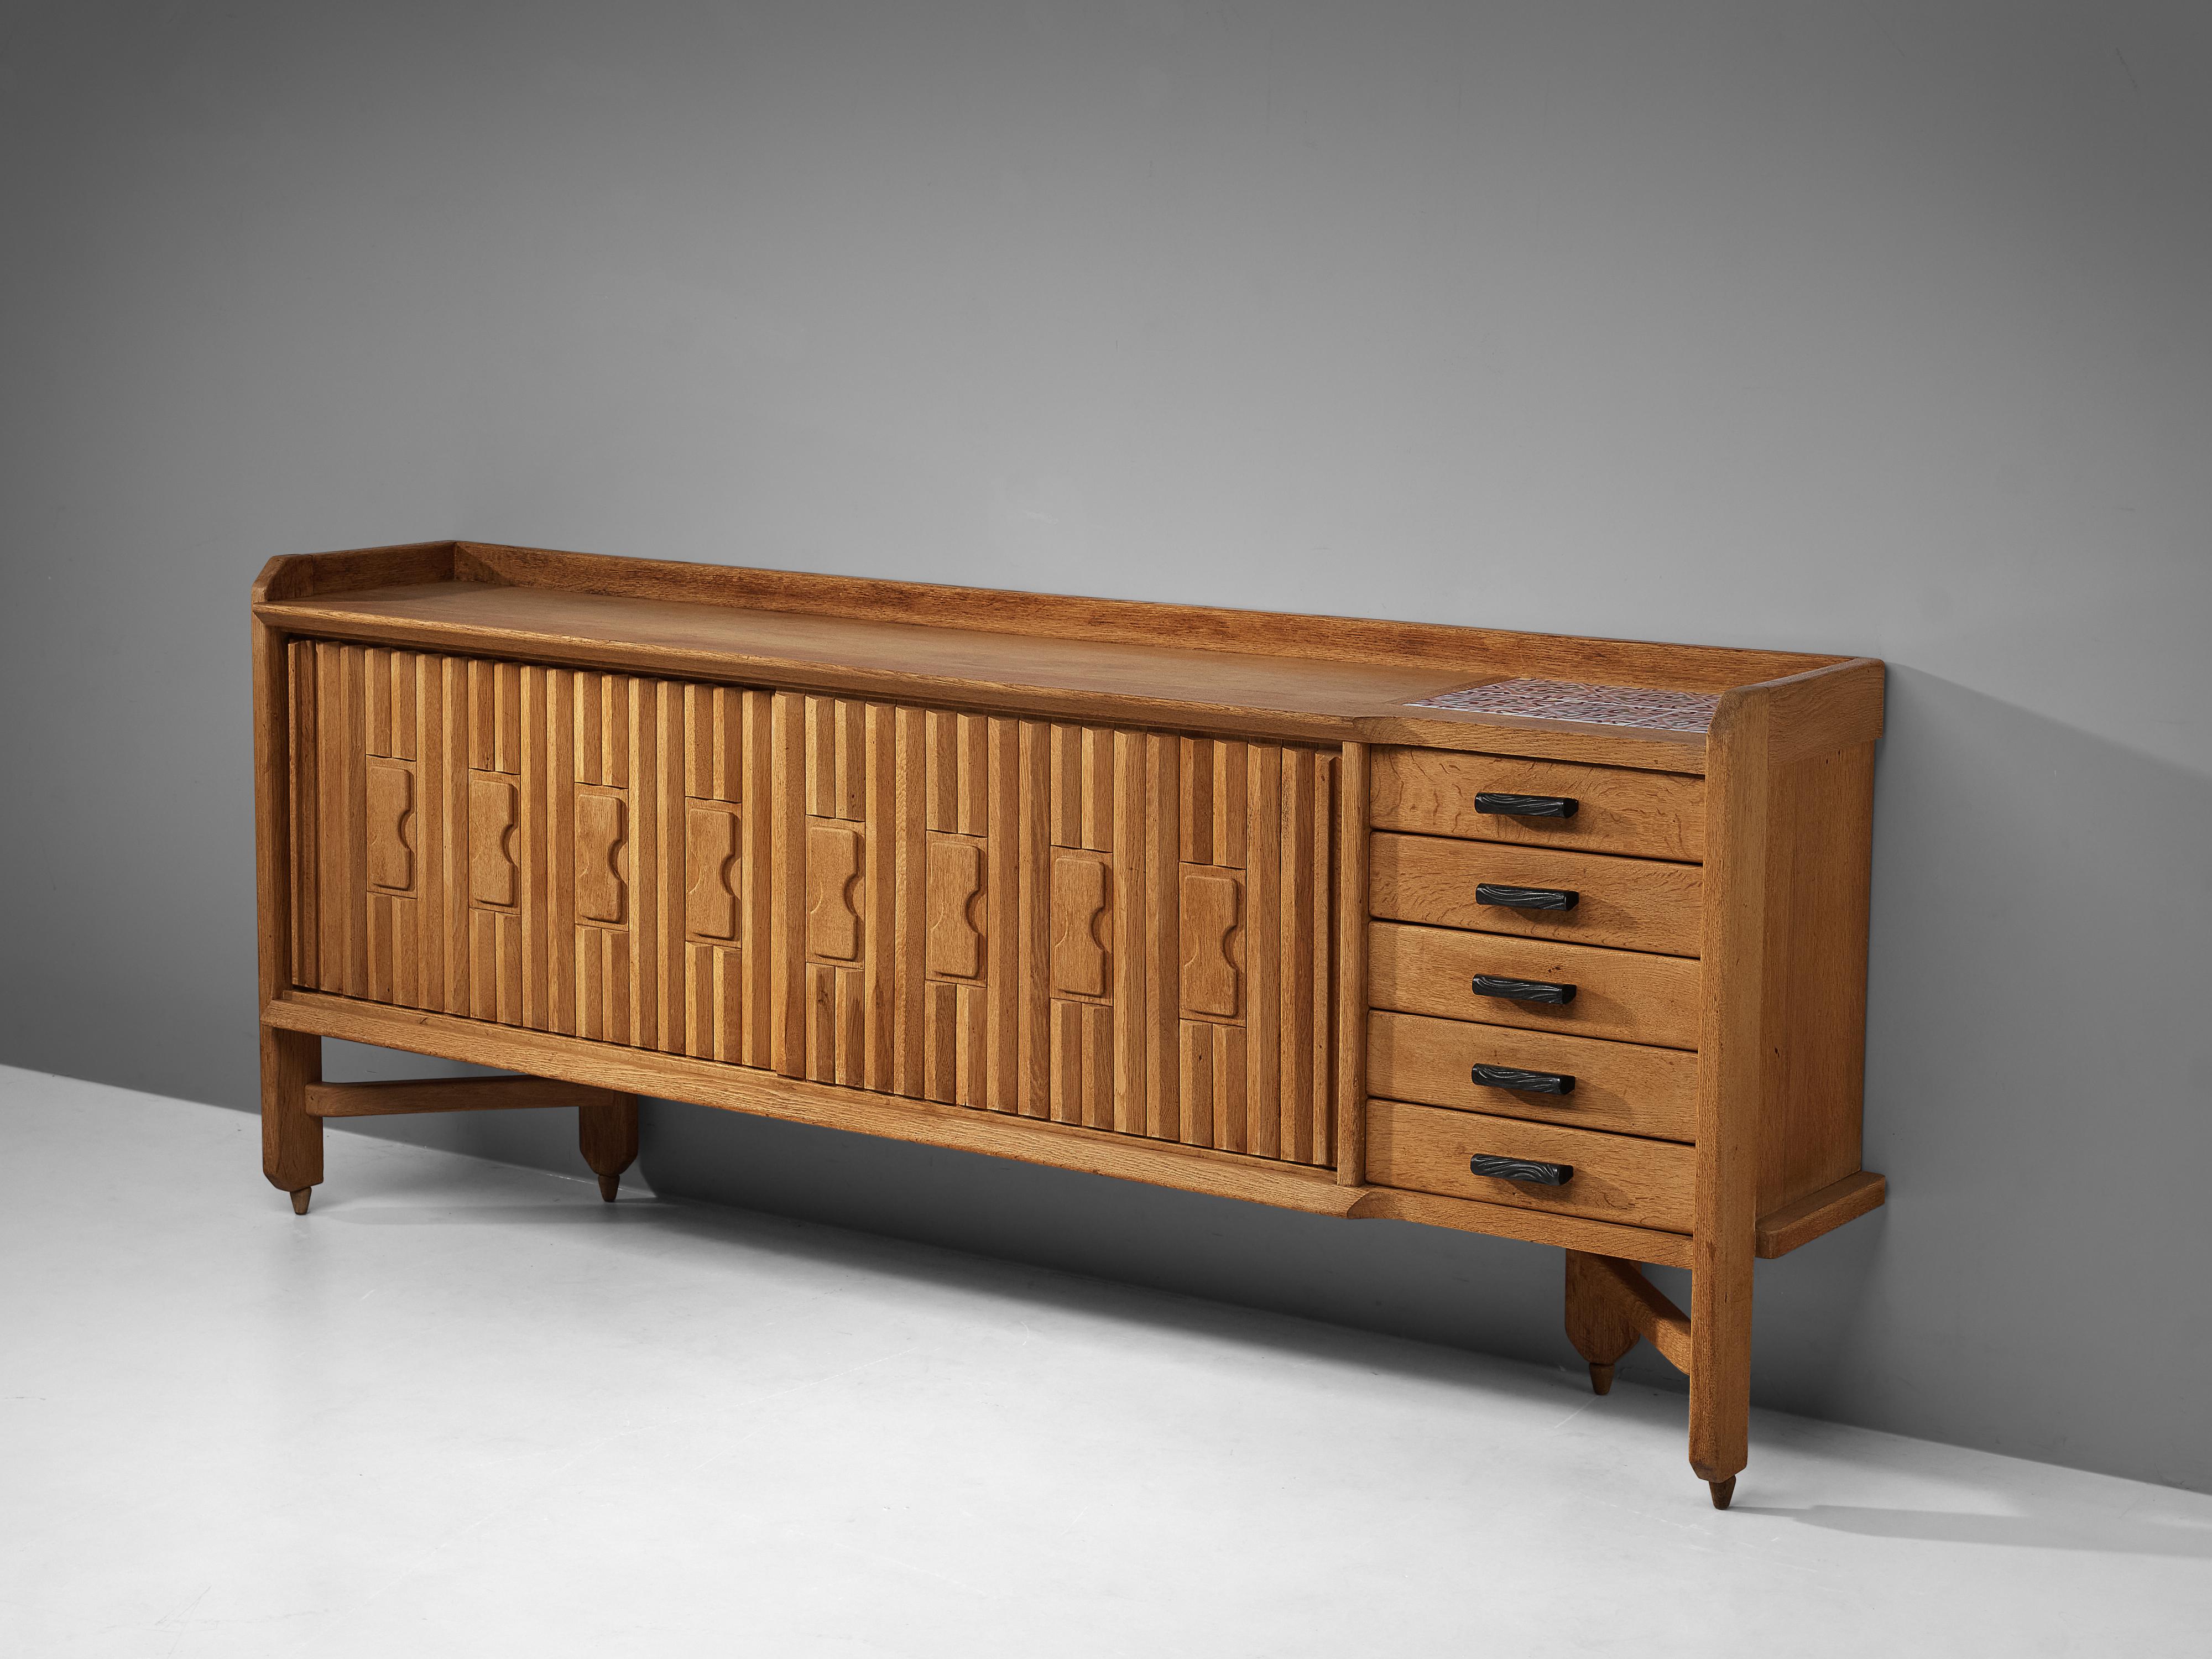 Mid-20th Century Guillerme et Chambron Sideboard in Solid Oak with Ceramic Tiles